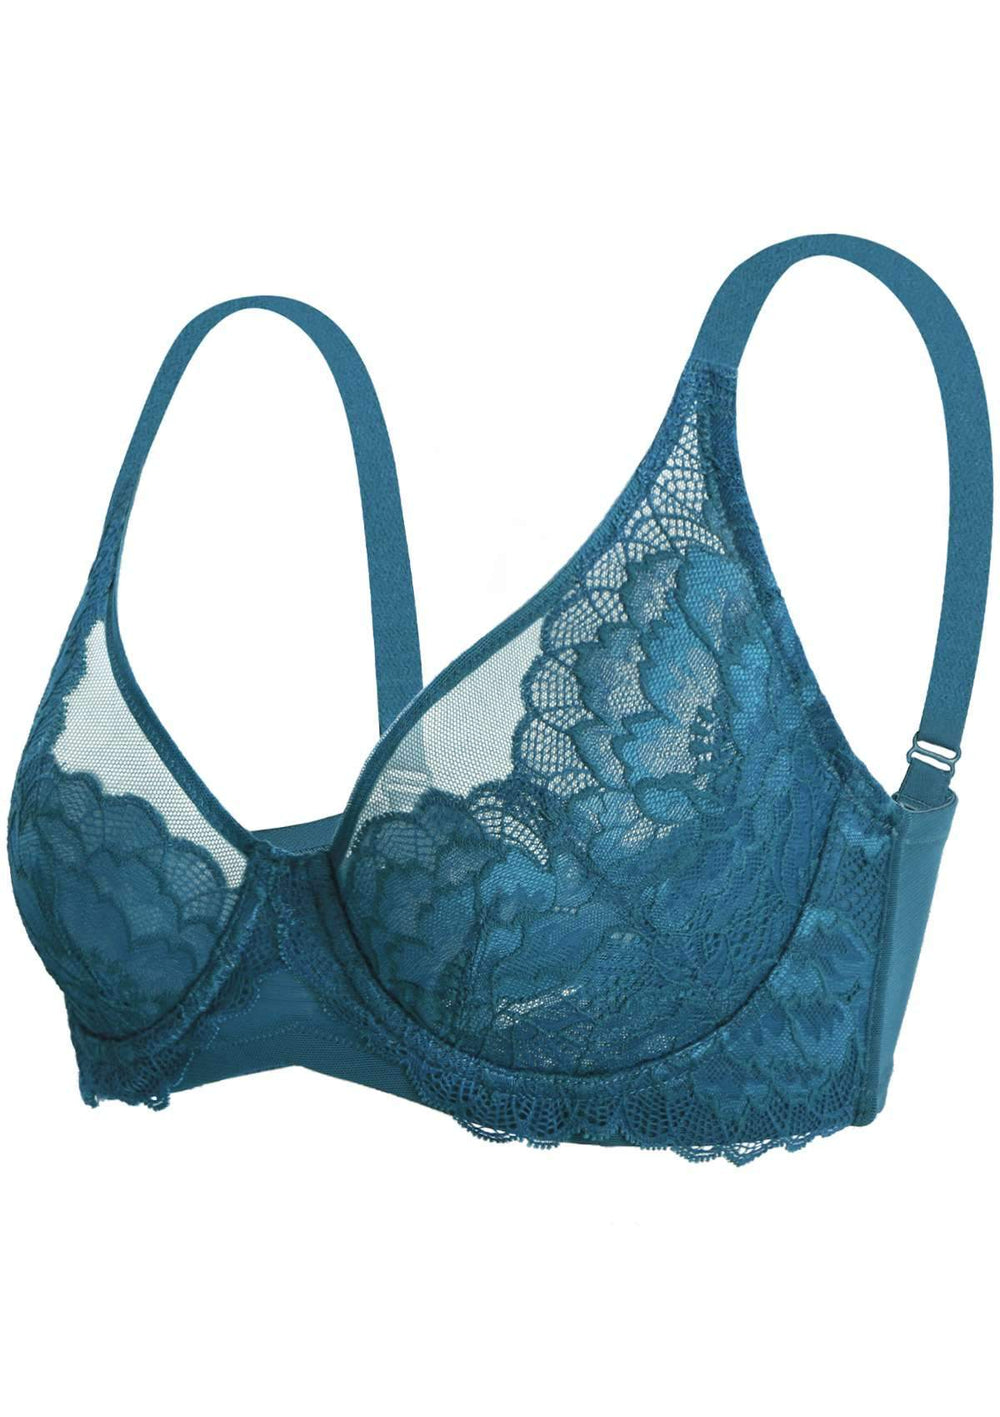 Viola's Secret Style 9292 Marbled Blue Underwire Padded Push-Up Bra 42D -  Helia Beer Co